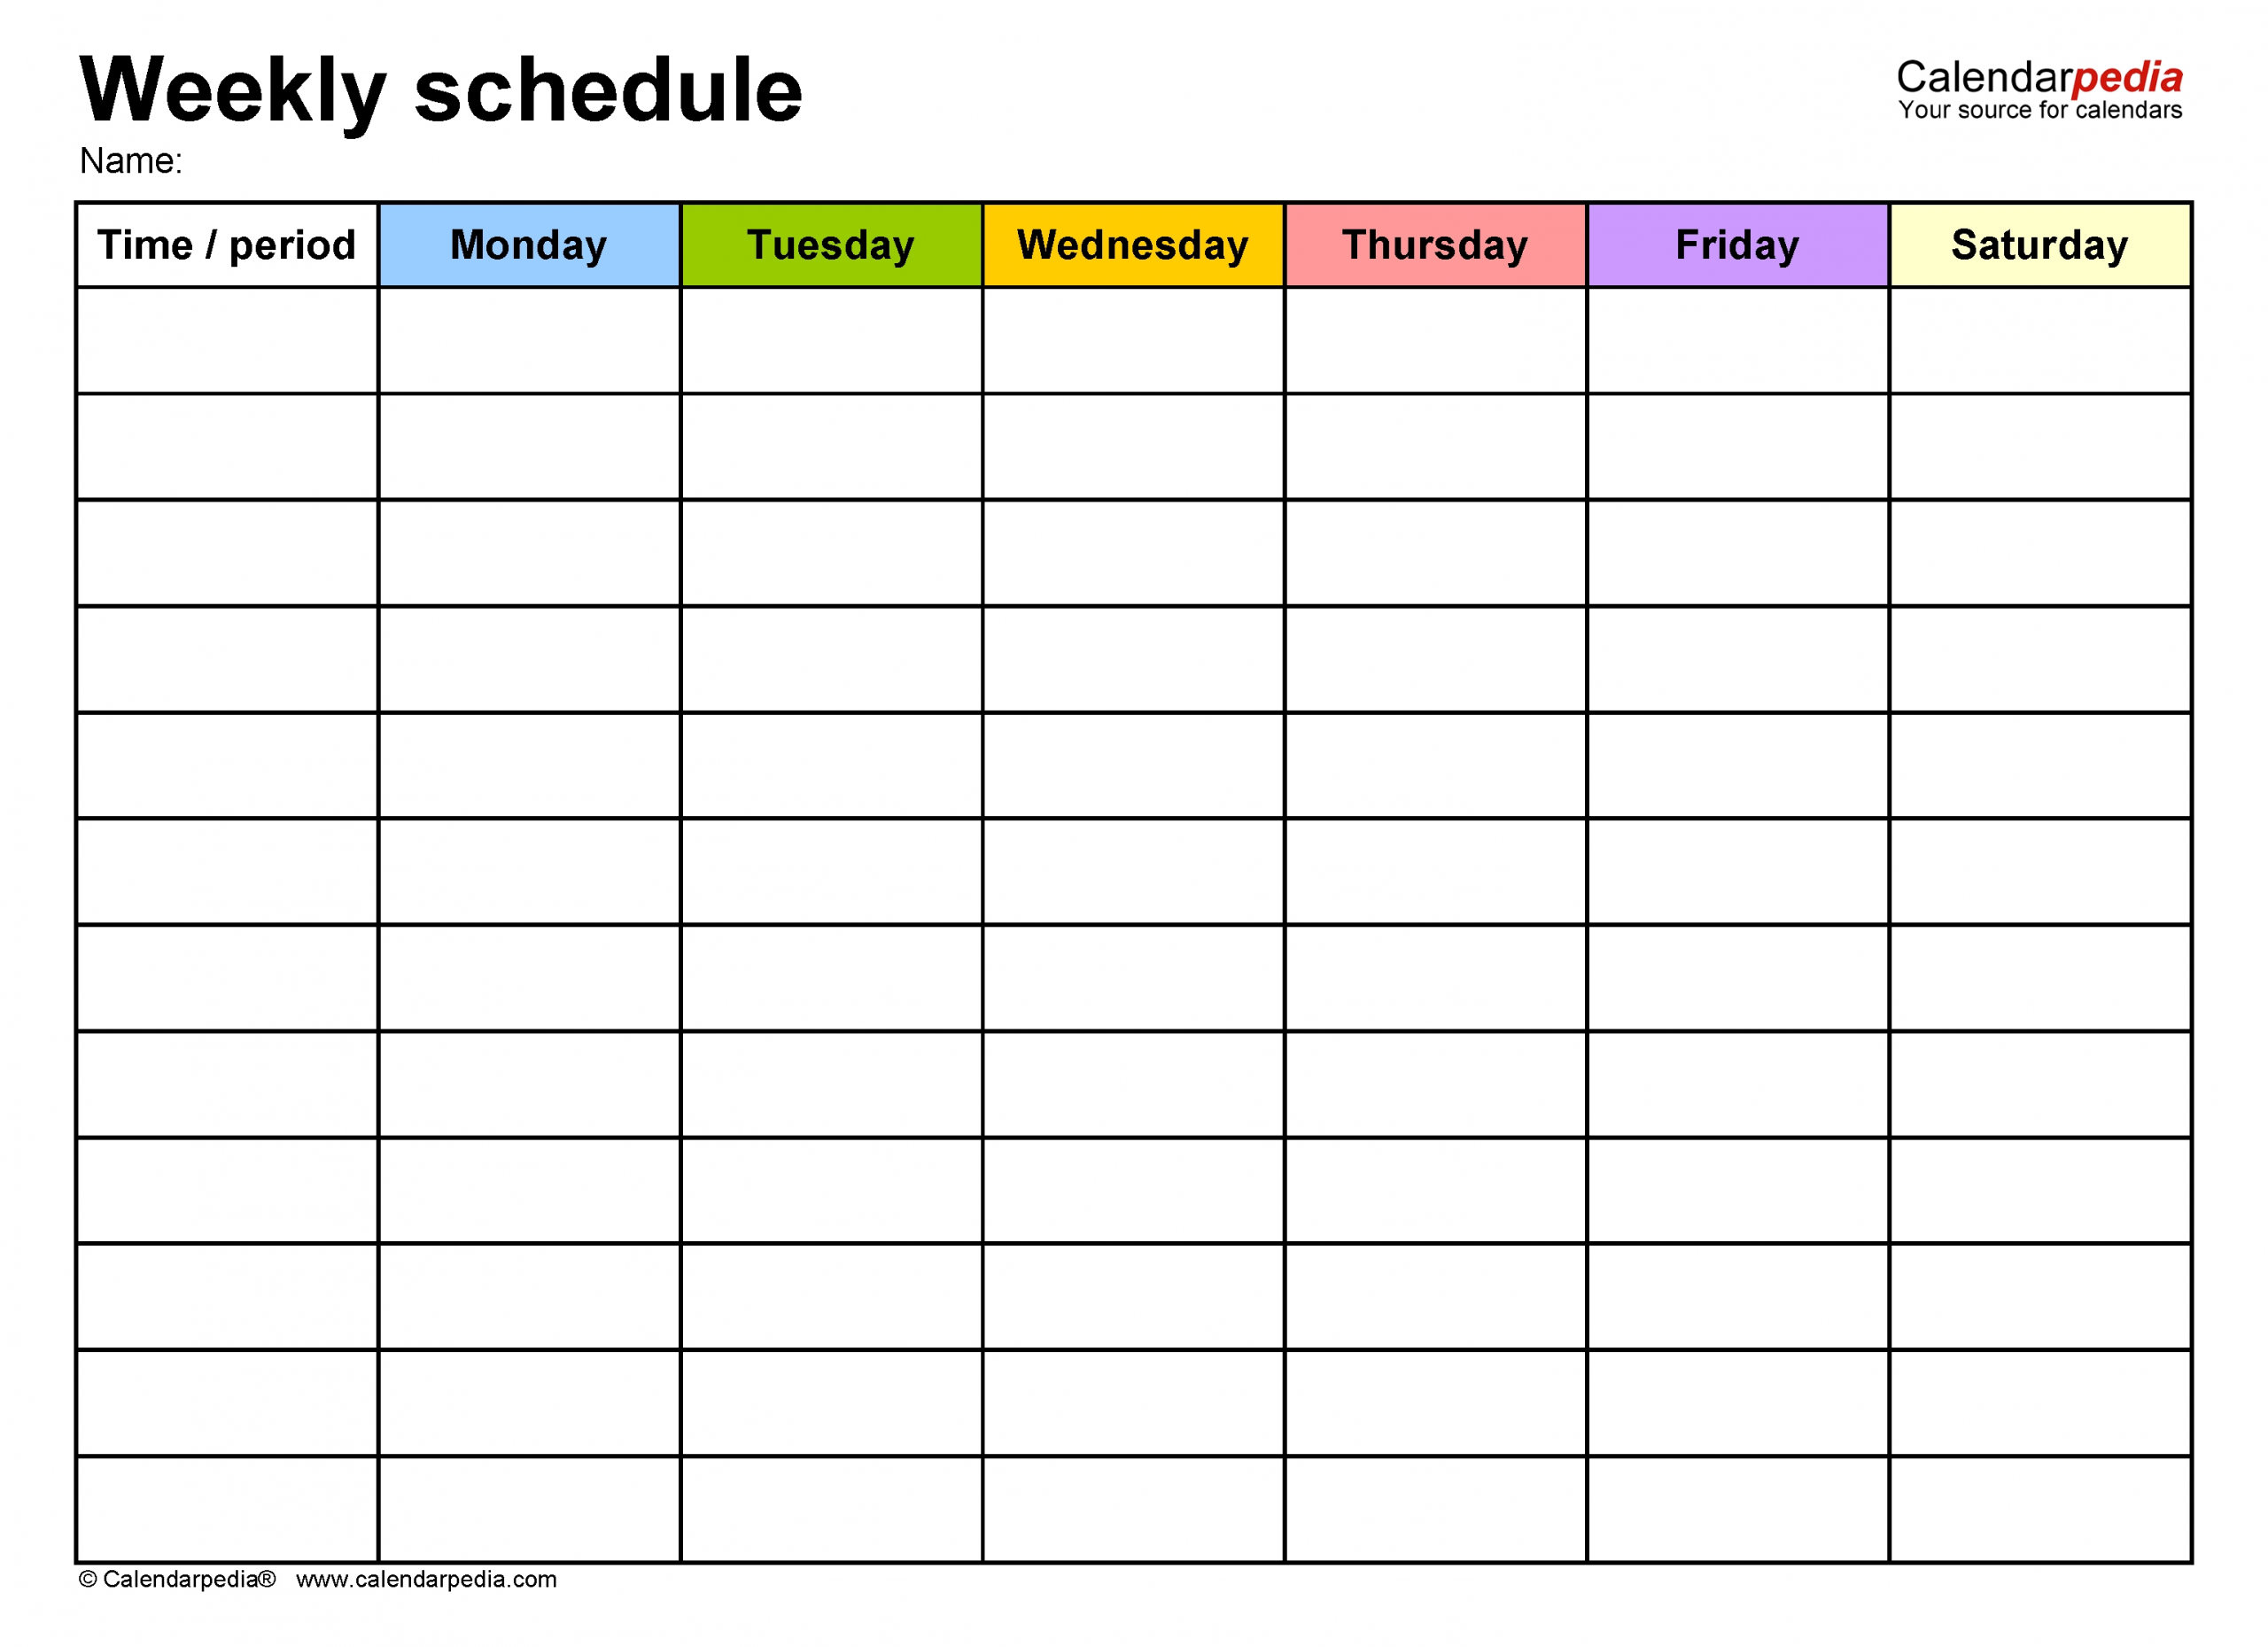 Get How To Make A Schedule Monday Through Friday 9 - 3